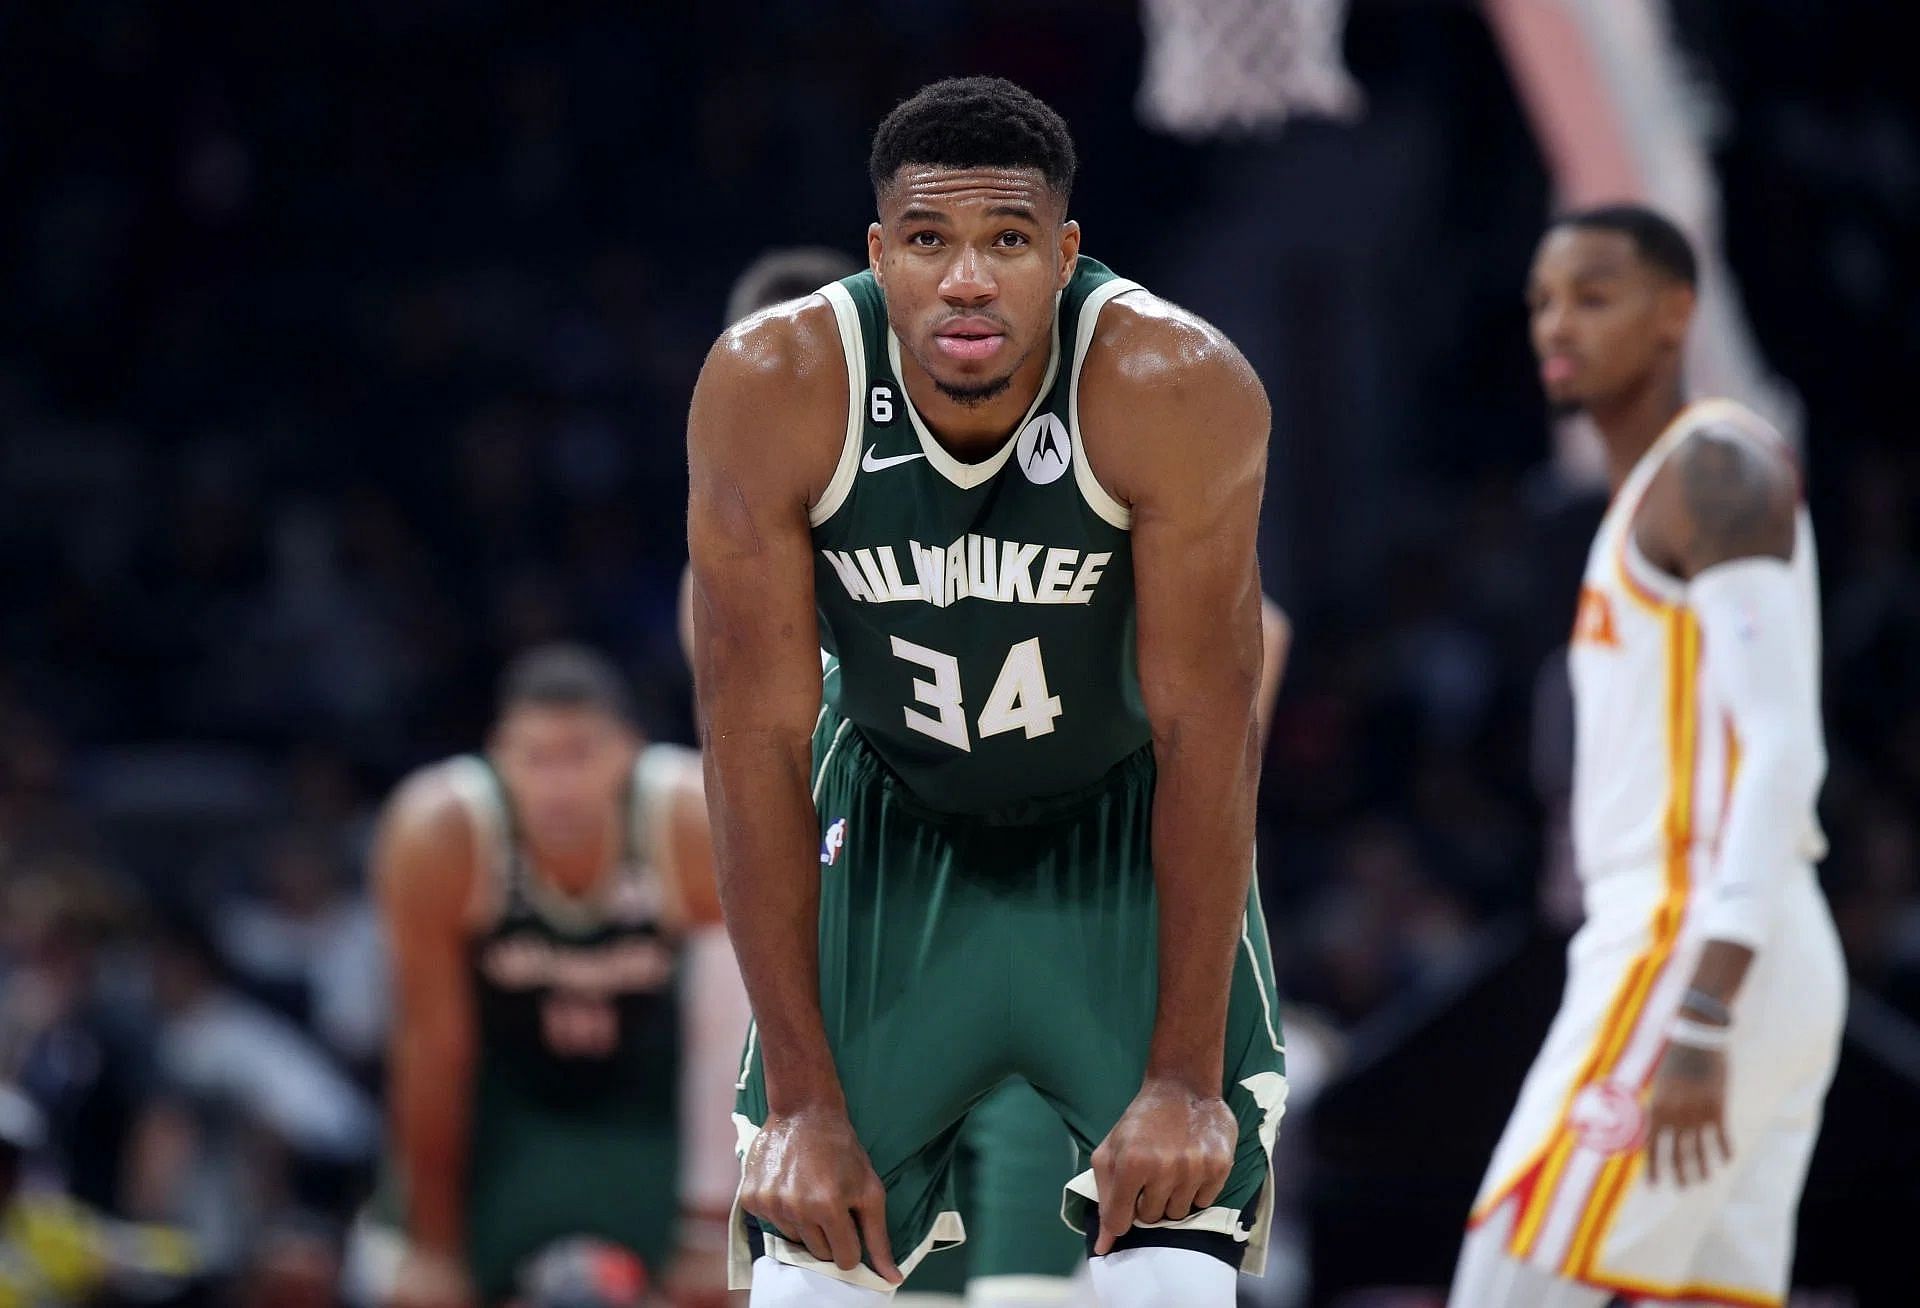 Giannis Antetokounmpo was selected 15th overall by the Milwaukee Bucks in the 2013 draft. 